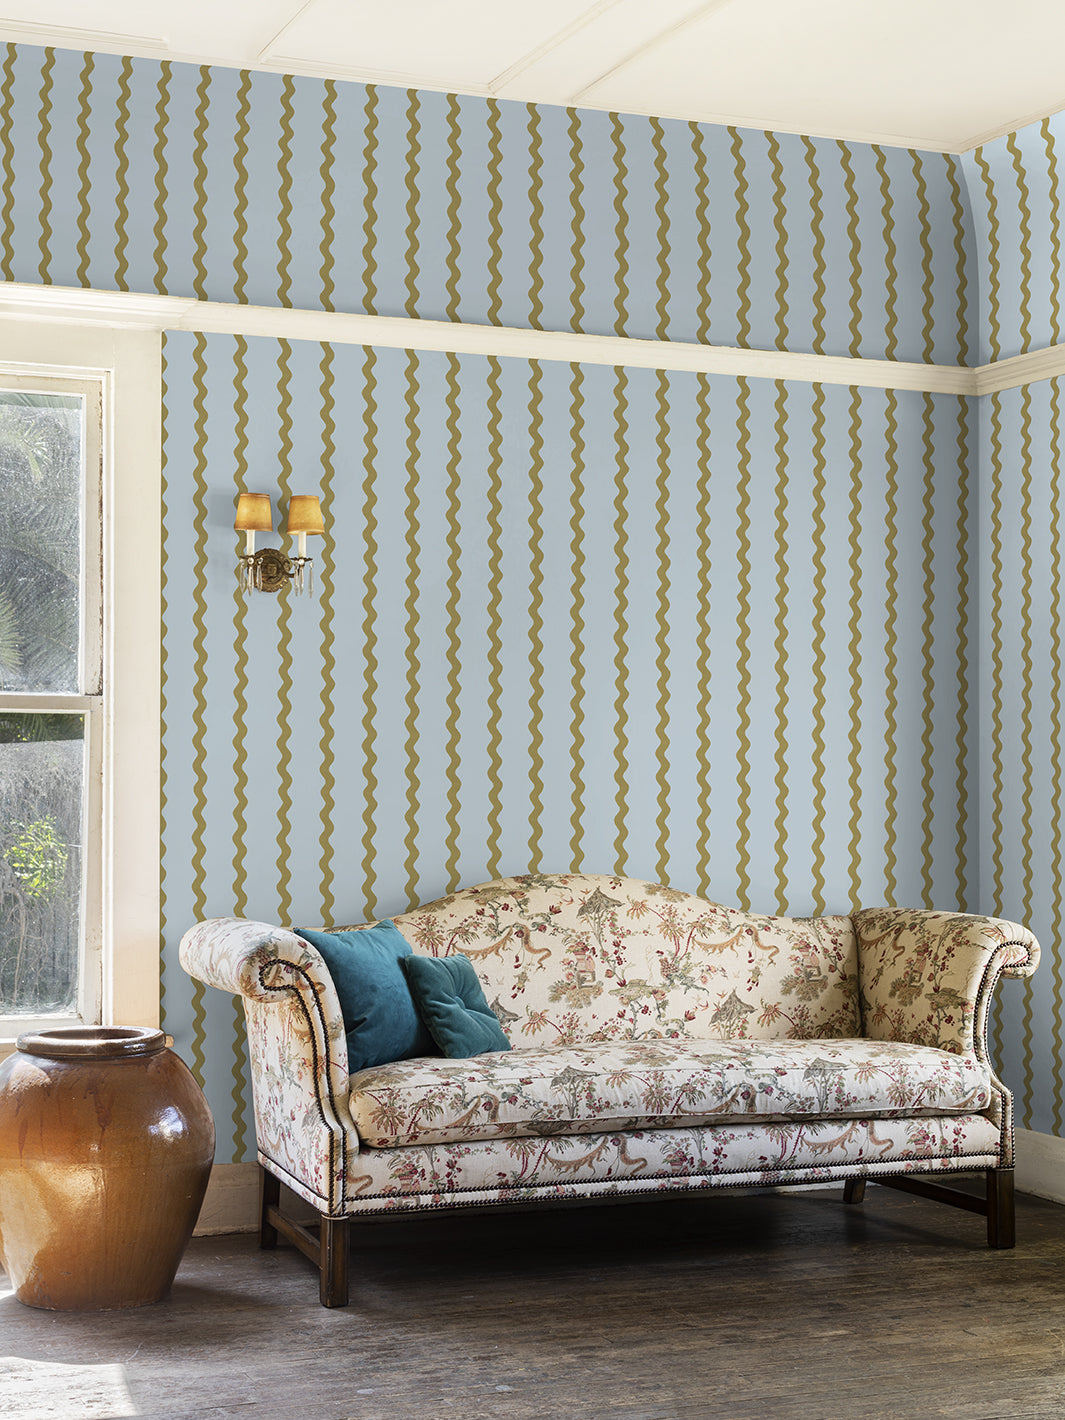 'Ric-Rac Stripe' Wallpaper by Sarah Jessica Parker - Morning Dew Olive